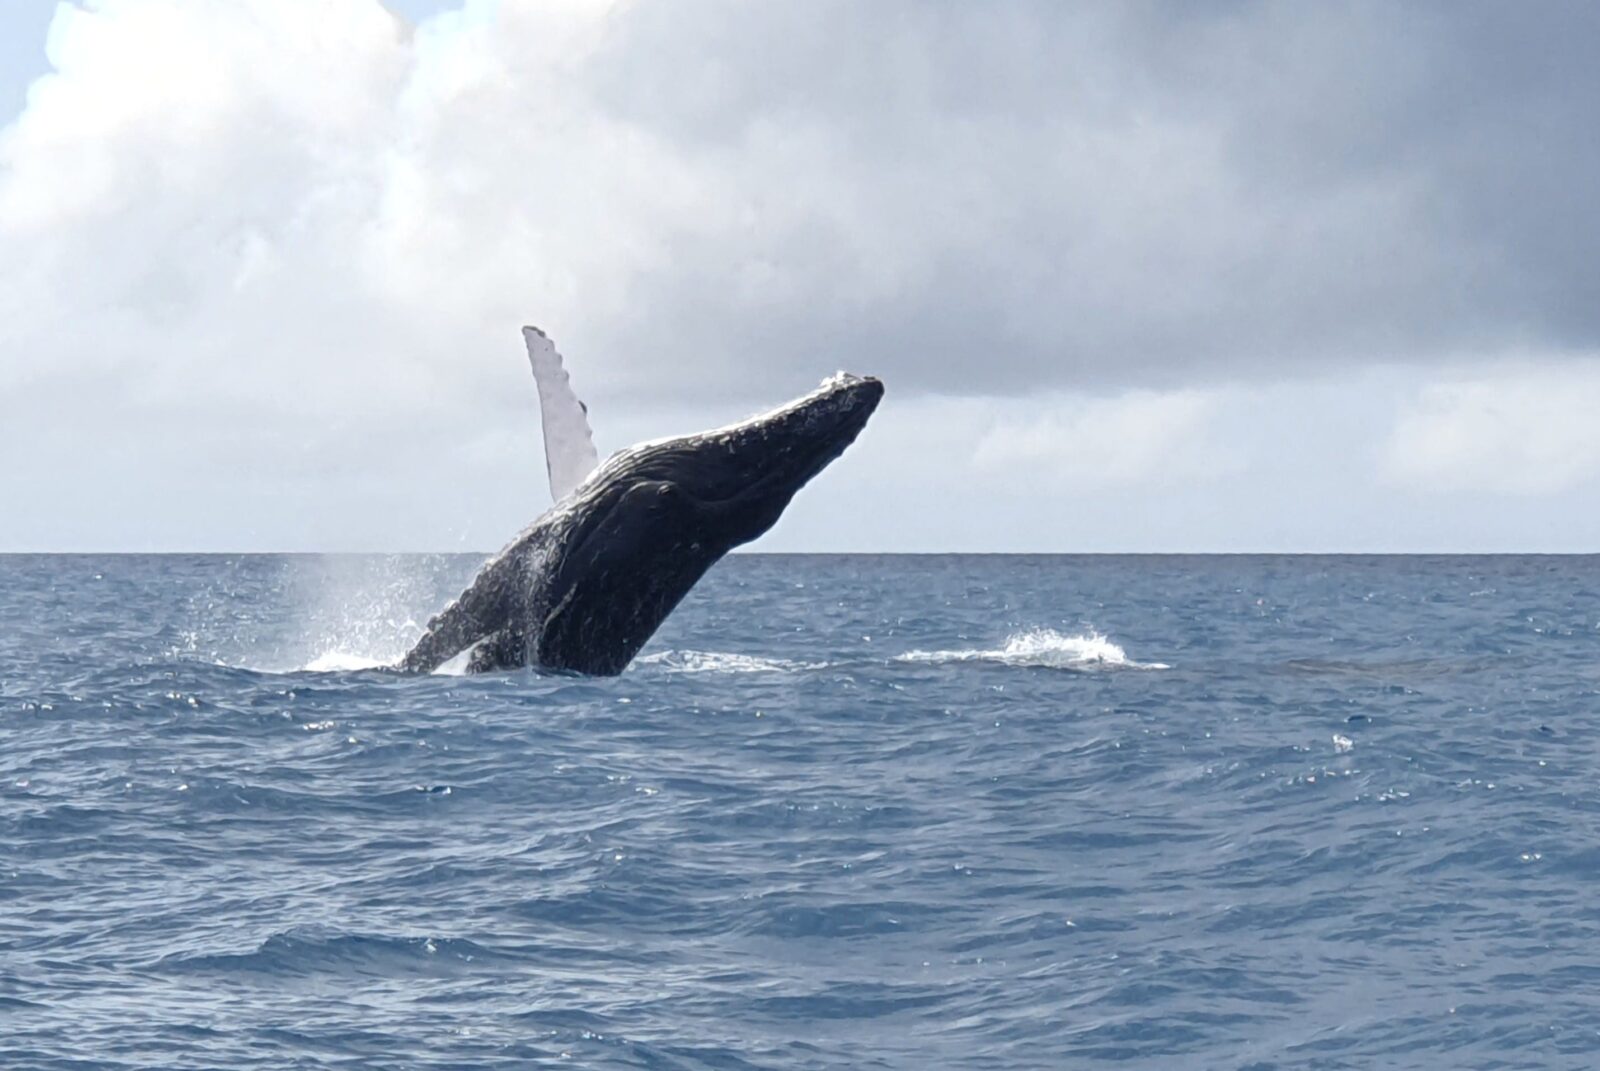 Whale Watching Great Keppel Island